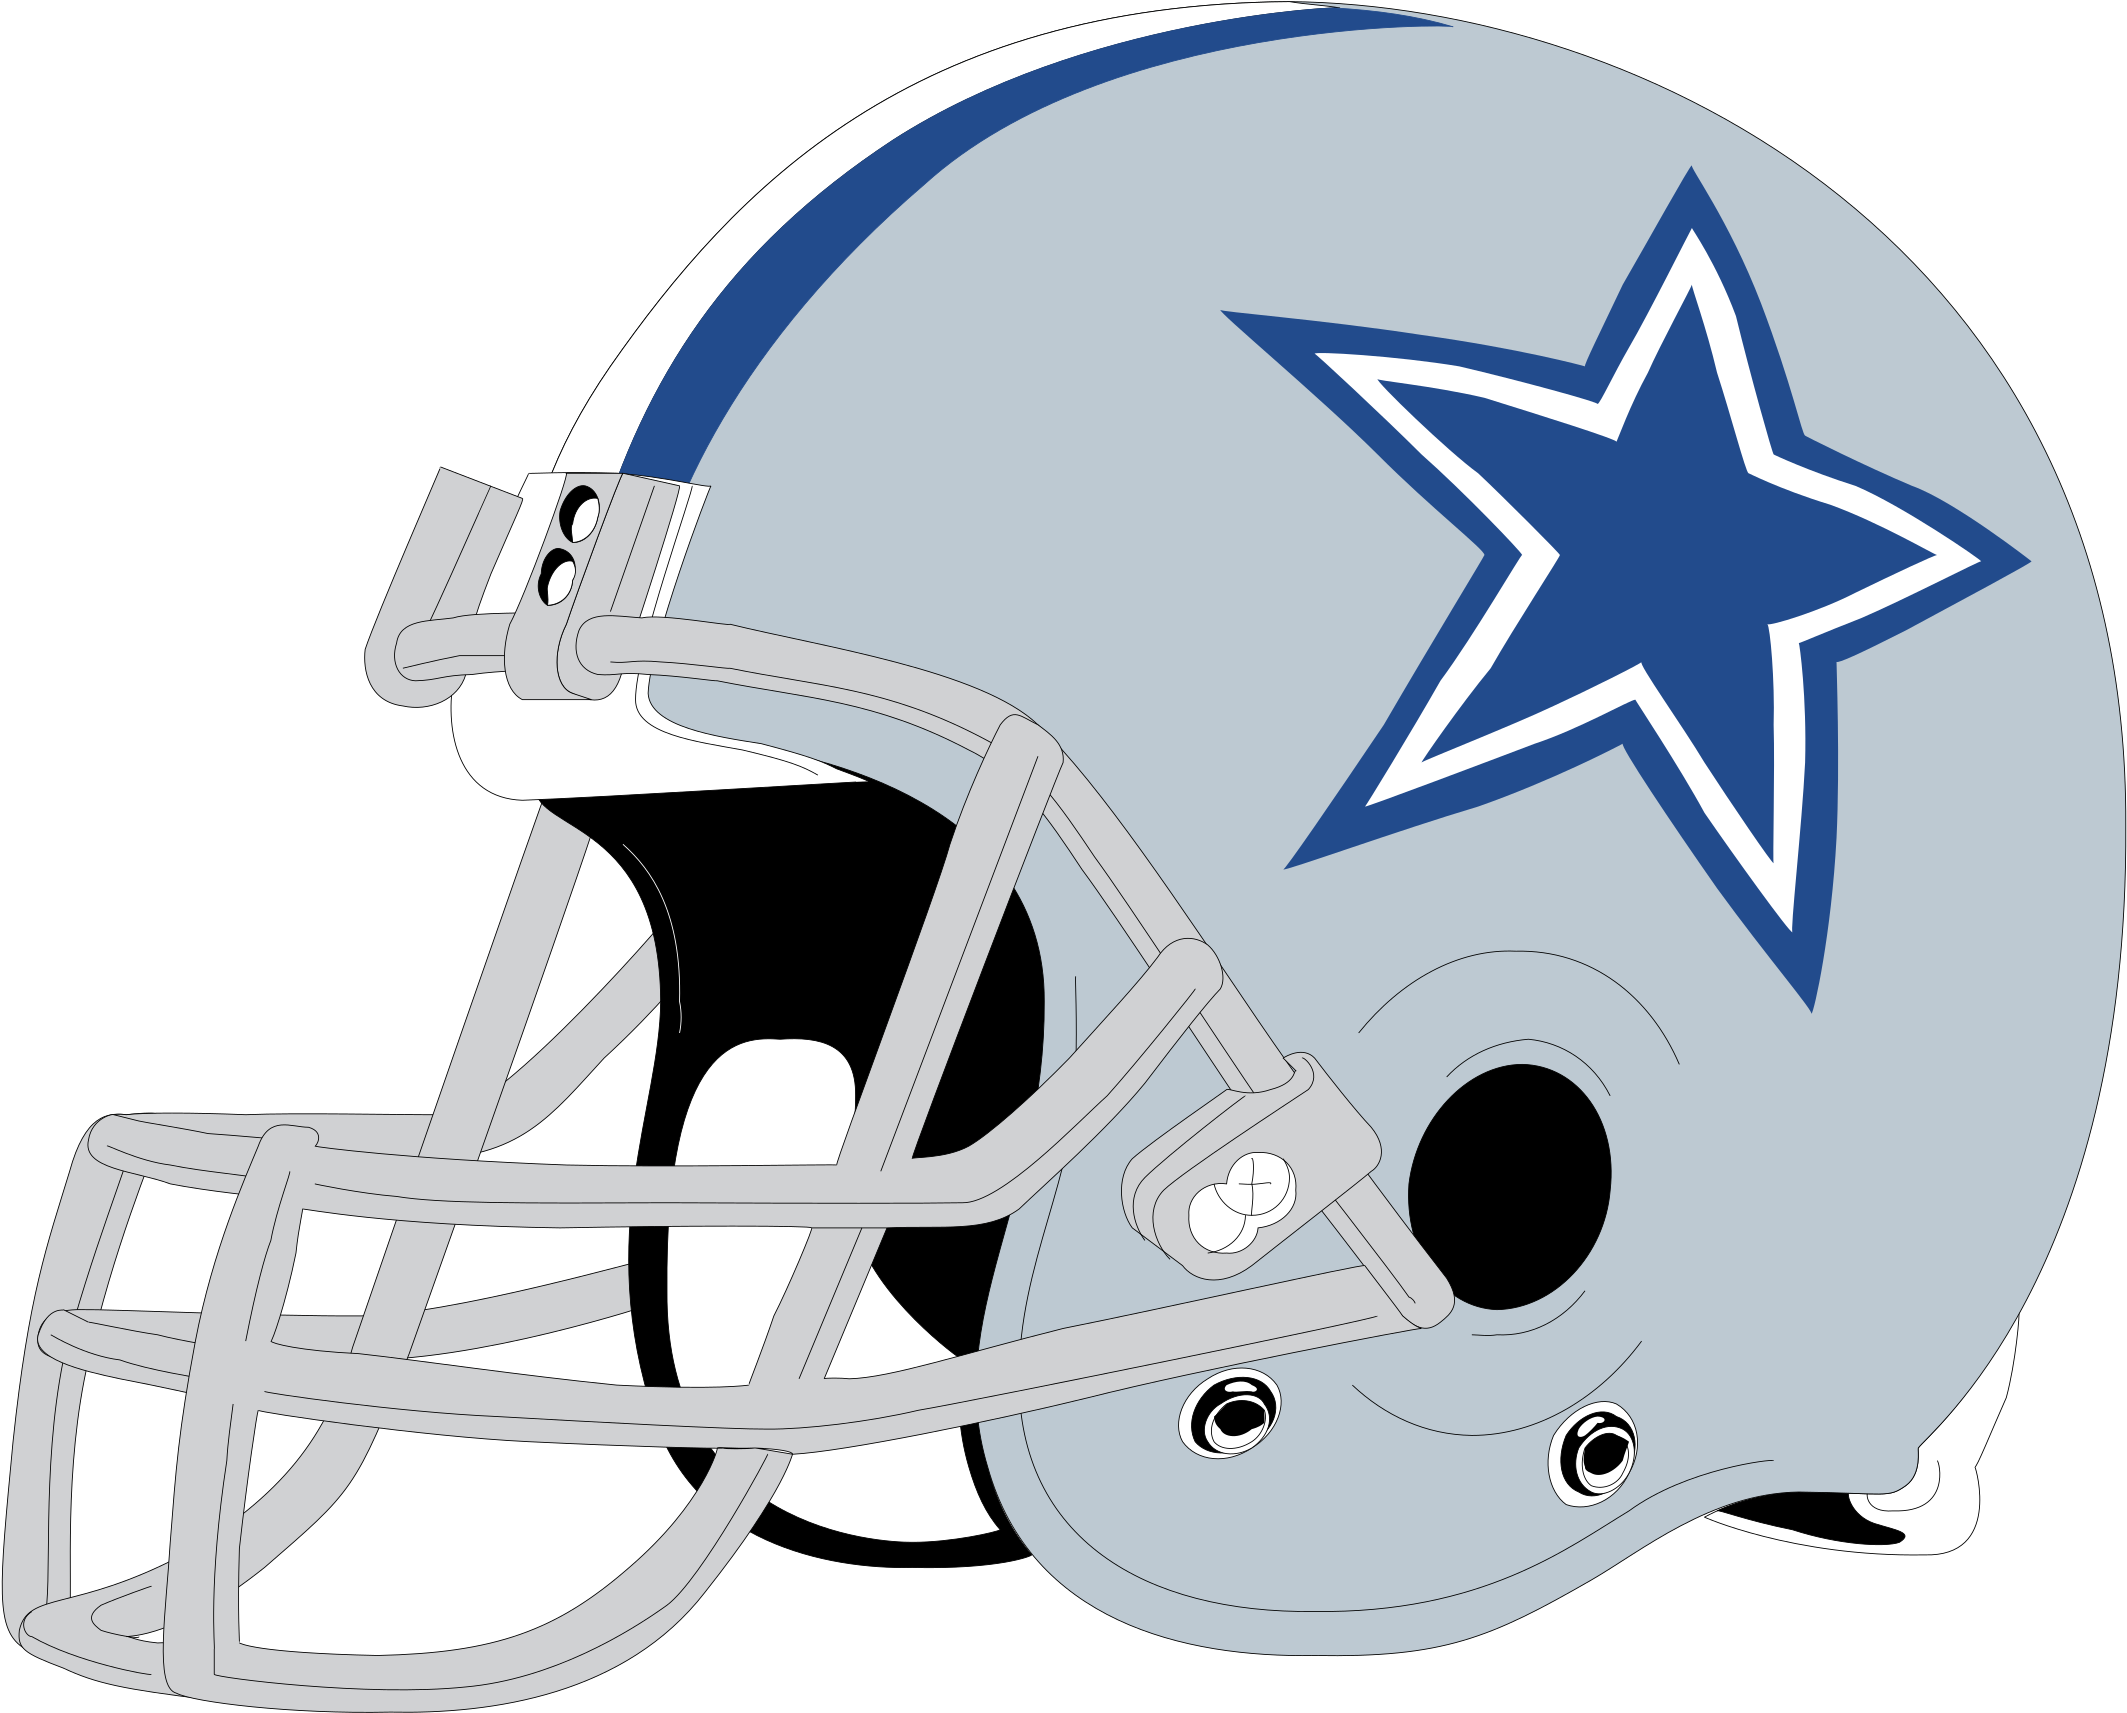 Dallas Cowboys Coloring Pages - Dallas Cowboys Star, Find more high quality...